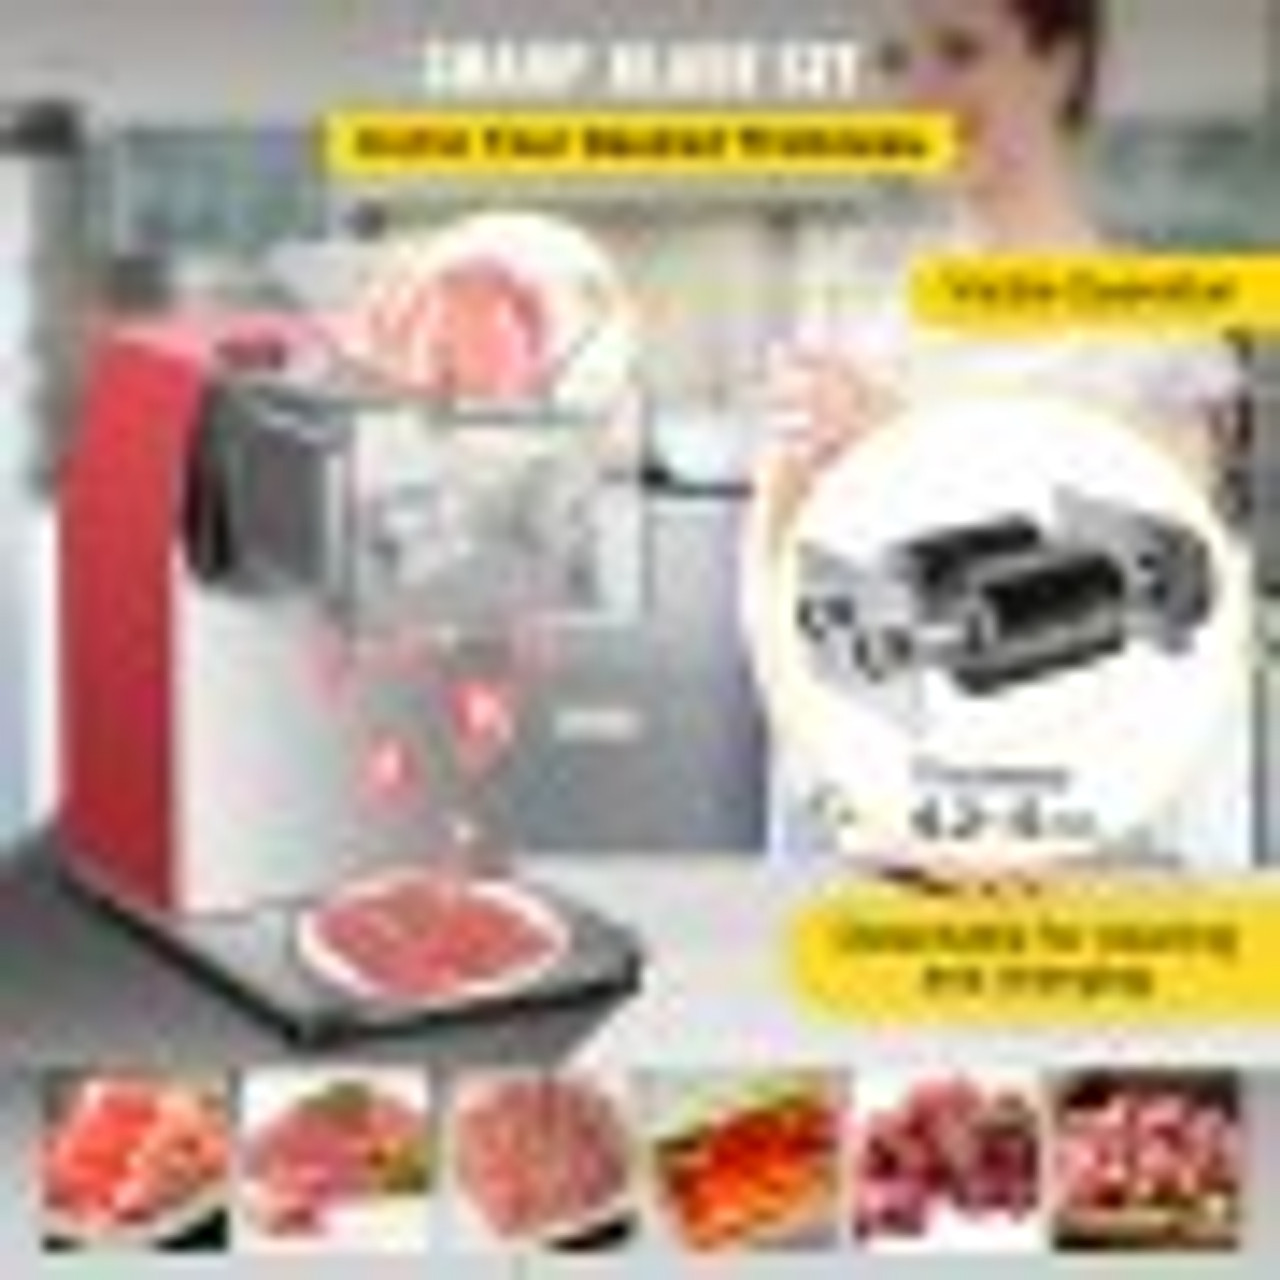 Commercial Meat Cutting Machine, 551 Lbs/H 850W Meat Shredding Machine, 5mm Blade Electric Meat Cutter, Stainless Steel Restaurant Food Cutter, for Kitchen Supermarket Lamb Beef Chicken, Red